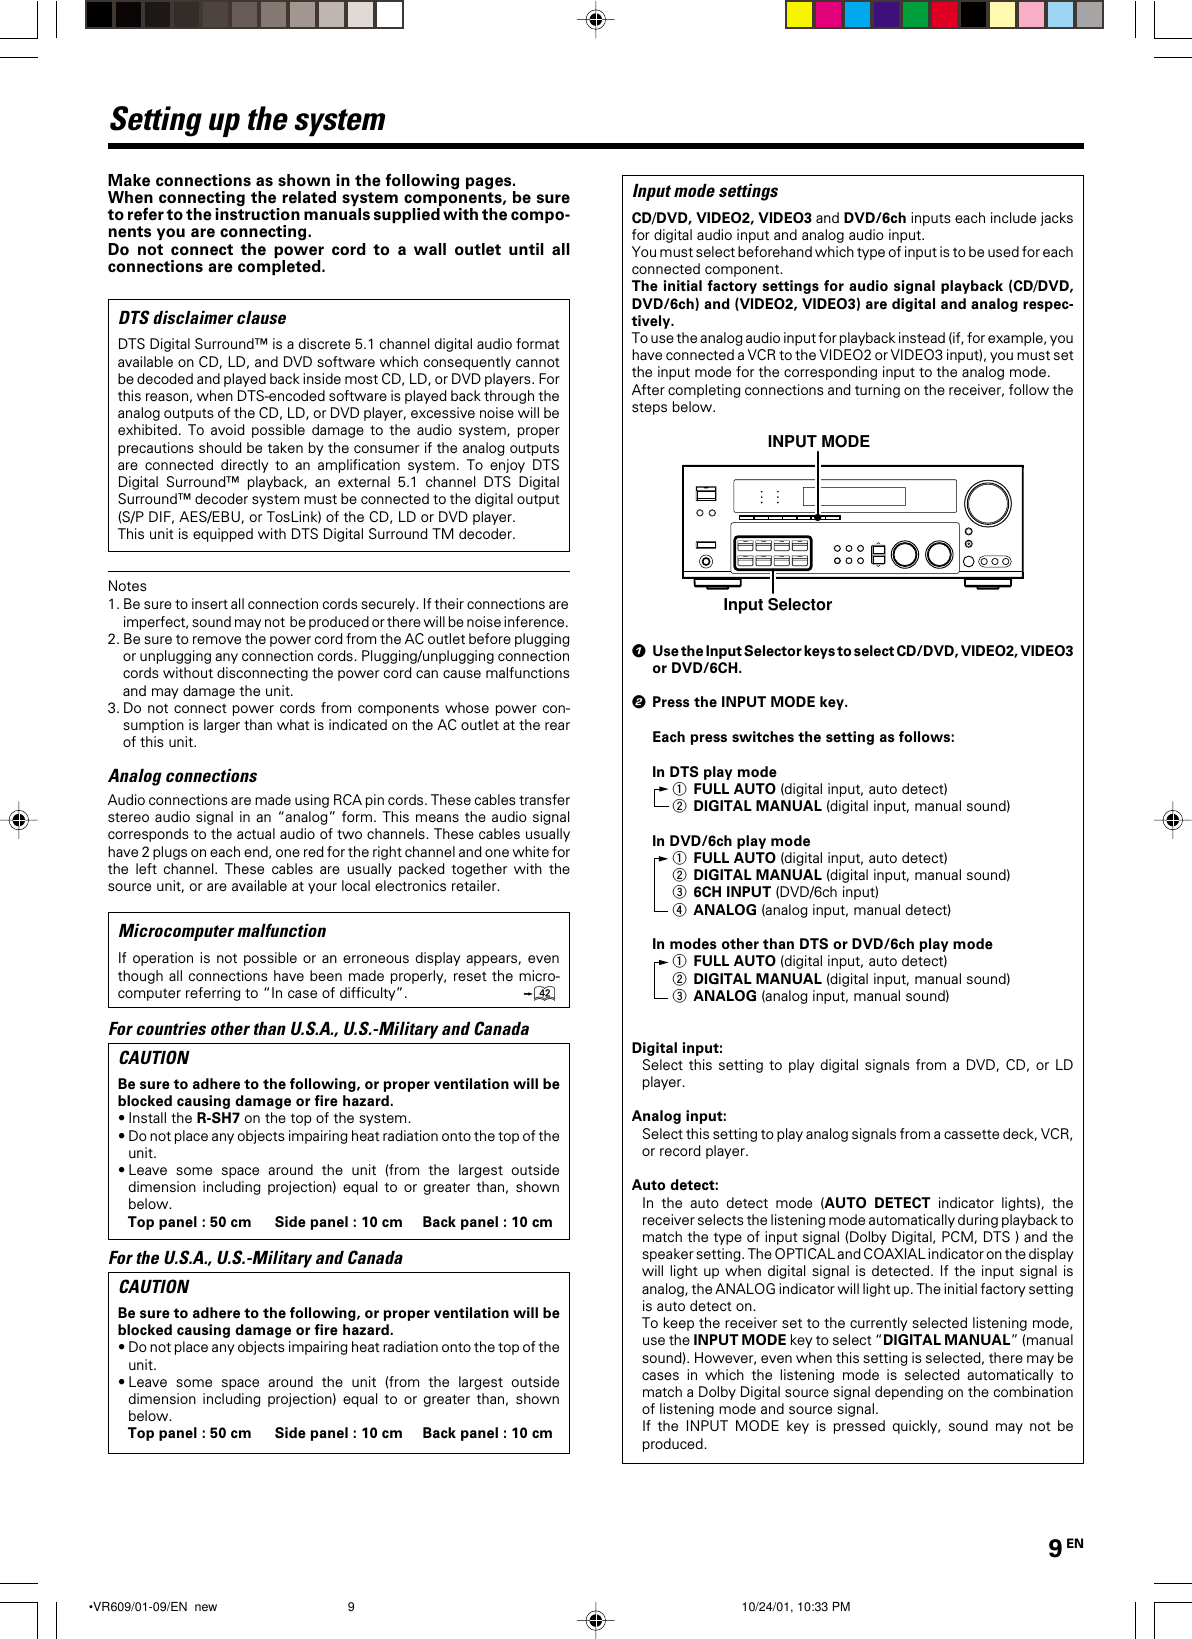 9 ENMake connections as shown in the following pages.When connecting the related system components, be sureto refer to the instruction manuals supplied with the compo-nents you are connecting.Do not connect the power cord to a wall outlet until allconnections are completed.DTS disclaimer clauseDTS Digital Surround™ is a discrete 5.1 channel digital audio formatavailable on CD, LD, and DVD software which consequently cannotbe decoded and played back inside most CD, LD, or DVD players. Forthis reason, when DTS-encoded software is played back through theanalog outputs of the CD, LD, or DVD player, excessive noise will beexhibited. To avoid possible damage to the audio system, properprecautions should be taken by the consumer if the analog outputsare connected directly to an amplification system. To enjoy DTSDigital Surround™ playback, an external 5.1 channel DTS DigitalSurround™ decoder system must be connected to the digital output(S/P DIF, AES/EBU, or TosLink) of the CD, LD or DVD player.This unit is equipped with DTS Digital Surround TM decoder.Notes1.Be sure to insert all connection cords securely. If their connections areimperfect, sound may not  be produced or there will be noise inference.2. Be sure to remove the power cord from the AC outlet before pluggingor unplugging any connection cords. Plugging/unplugging connectioncords without disconnecting the power cord can cause malfunctionsand may damage the unit.3. Do not connect power cords from components whose power con-sumption is larger than what is indicated on the AC outlet at the rearof this unit.Analog connectionsAudio connections are made using RCA pin cords. These cables transferstereo audio signal in an “analog” form. This means the audio signalcorresponds to the actual audio of two channels. These cables usuallyhave 2 plugs on each end, one red for the right channel and one white forthe left channel. These cables are usually packed together with thesource unit, or are available at your local electronics retailer.Microcomputer malfunctionIf operation is not possible or an erroneous display appears, eventhough all connections have been made properly, reset the micro-computer referring to “In case of difficulty”.wFor countries other than U.S.A., U.S.-Military and CanadaCAUTIONBe sure to adhere to the following, or proper ventilation will beblocked causing damage or fire hazard.•Install the R-SH7 on the top of the system.•Do not place any objects impairing heat radiation onto the top of theunit.•Leave some space around the unit (from the largest outsidedimension including projection) equal to or greater than, shownbelow.Top panel : 50 cm Side panel : 10 cm Back panel : 10 cmFor the U.S.A., U.S.-Military and CanadaCAUTIONBe sure to adhere to the following, or proper ventilation will beblocked causing damage or fire hazard.•Do not place any objects impairing heat radiation onto the top of theunit.•Leave some space around the unit (from the largest outsidedimension including projection) equal to or greater than, shownbelow.Top panel : 50 cm Side panel : 10 cm Back panel : 10 cmSetting up the systemInput mode settingsCD/DVD, VIDEO2, VIDEO3 and DVD/6ch inputs each include jacksfor digital audio input and analog audio input.You must select beforehand which type of input is to be used for eachconnected component.The initial factory settings for audio signal playback (CD/DVD,DVD/6ch) and (VIDEO2, VIDEO3) are digital and analog respec-tively.To use the analog audio input for playback instead (if, for example, youhave connected a VCR to the VIDEO2 or VIDEO3 input), you must setthe input mode for the corresponding input to the analog mode.After completing connections and turning on the receiver, follow thesteps below.INPUT MODEInput Selector1Use the Input Selector keys to select CD/DVD, VIDEO2, VIDEO3or DVD/6CH.2Press the INPUT MODE key.Each press switches the setting as follows:In DTS play mode1FULL AUTO (digital input, auto detect)2DIGITAL MANUAL (digital input, manual sound)In DVD/6ch play mode1FULL AUTO (digital input, auto detect)2DIGITAL MANUAL (digital input, manual sound)36CH INPUT (DVD/6ch input)4ANALOG (analog input, manual detect)In modes other than DTS or DVD/6ch play mode1FULL AUTO (digital input, auto detect)2DIGITAL MANUAL (digital input, manual sound)3ANALOG (analog input, manual sound)Digital input:Select this setting to play digital signals from a DVD, CD, or LDplayer.Analog input:Select this setting to play analog signals from a cassette deck, VCR,or record player.Auto detect:In the auto detect mode (AUTO DETECT indicator lights), thereceiver selects the listening mode automatically during playback tomatch the type of input signal (Dolby Digital, PCM, DTS ) and thespeaker setting. The OPTICAL and COAXIAL indicator on the displaywill light up when digital signal is detected. If the input signal isanalog, the ANALOG indicator will light up. The initial factory settingis auto detect on.To keep the receiver set to the currently selected listening mode,use the INPUT MODE key to select “DIGITAL MANUAL” (manualsound). However, even when this setting is selected, there may becases in which the listening mode is selected automatically tomatch a Dolby Digital source signal depending on the combinationof listening mode and source signal.If the INPUT MODE key is pressed quickly, sound may not beproduced. •VR609/01-09/EN  new 10/24/01, 10:33 PM9